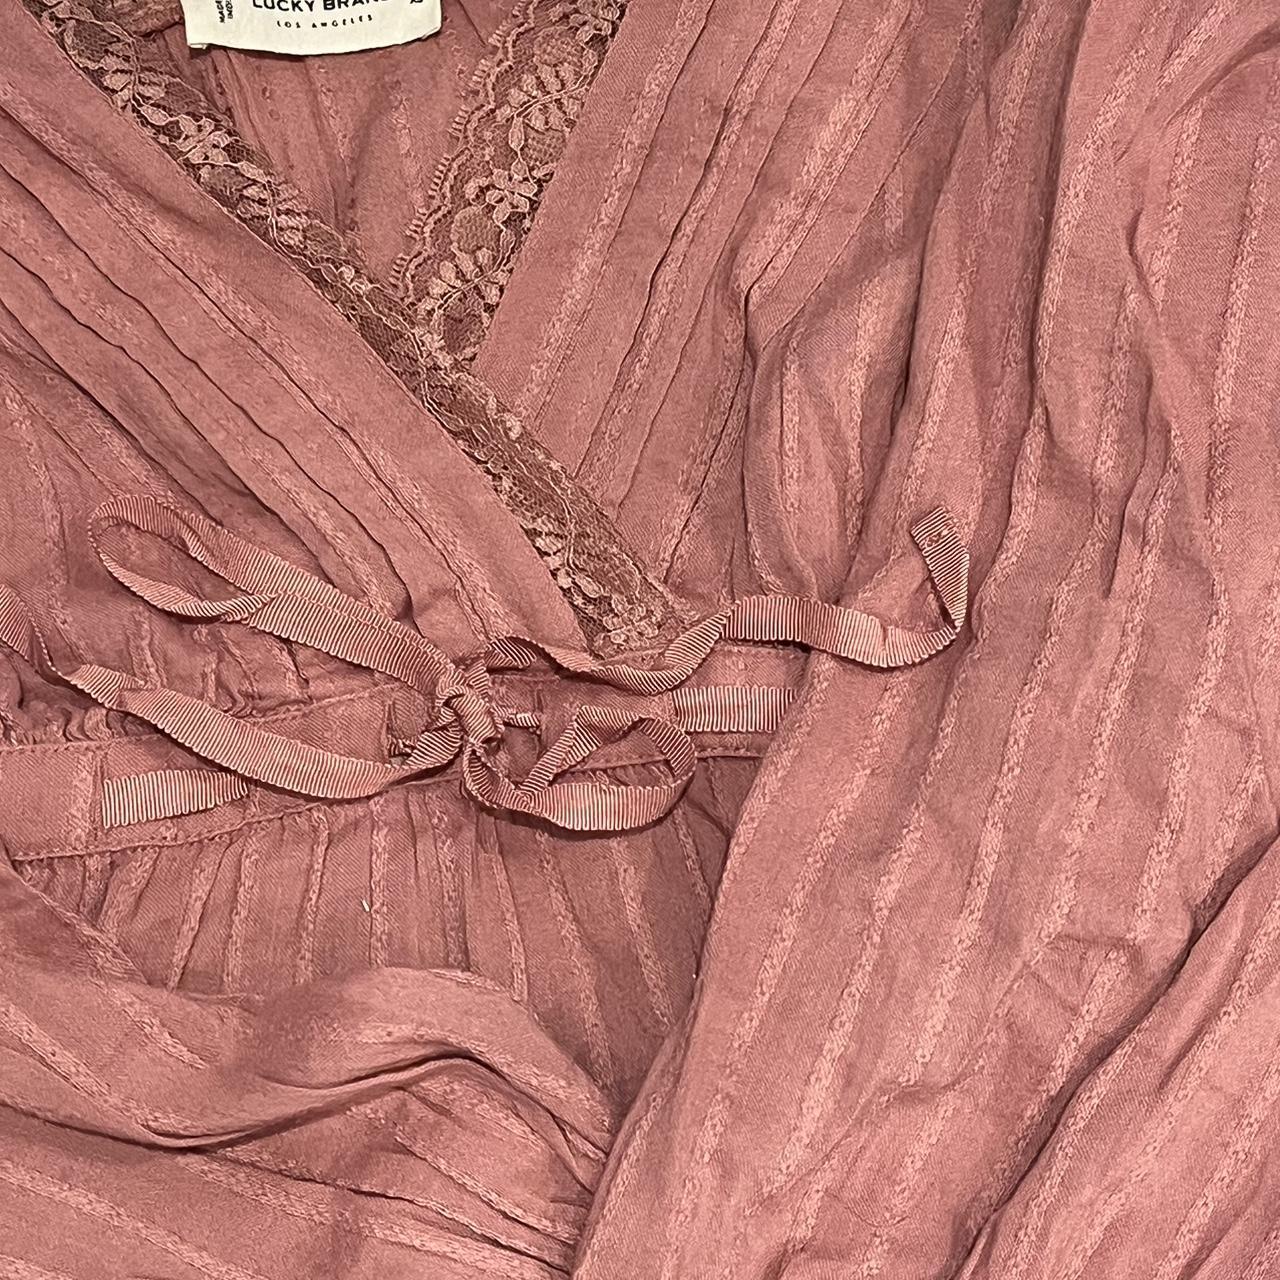 Lucky Brand pink blouse with bead detail •marked - Depop